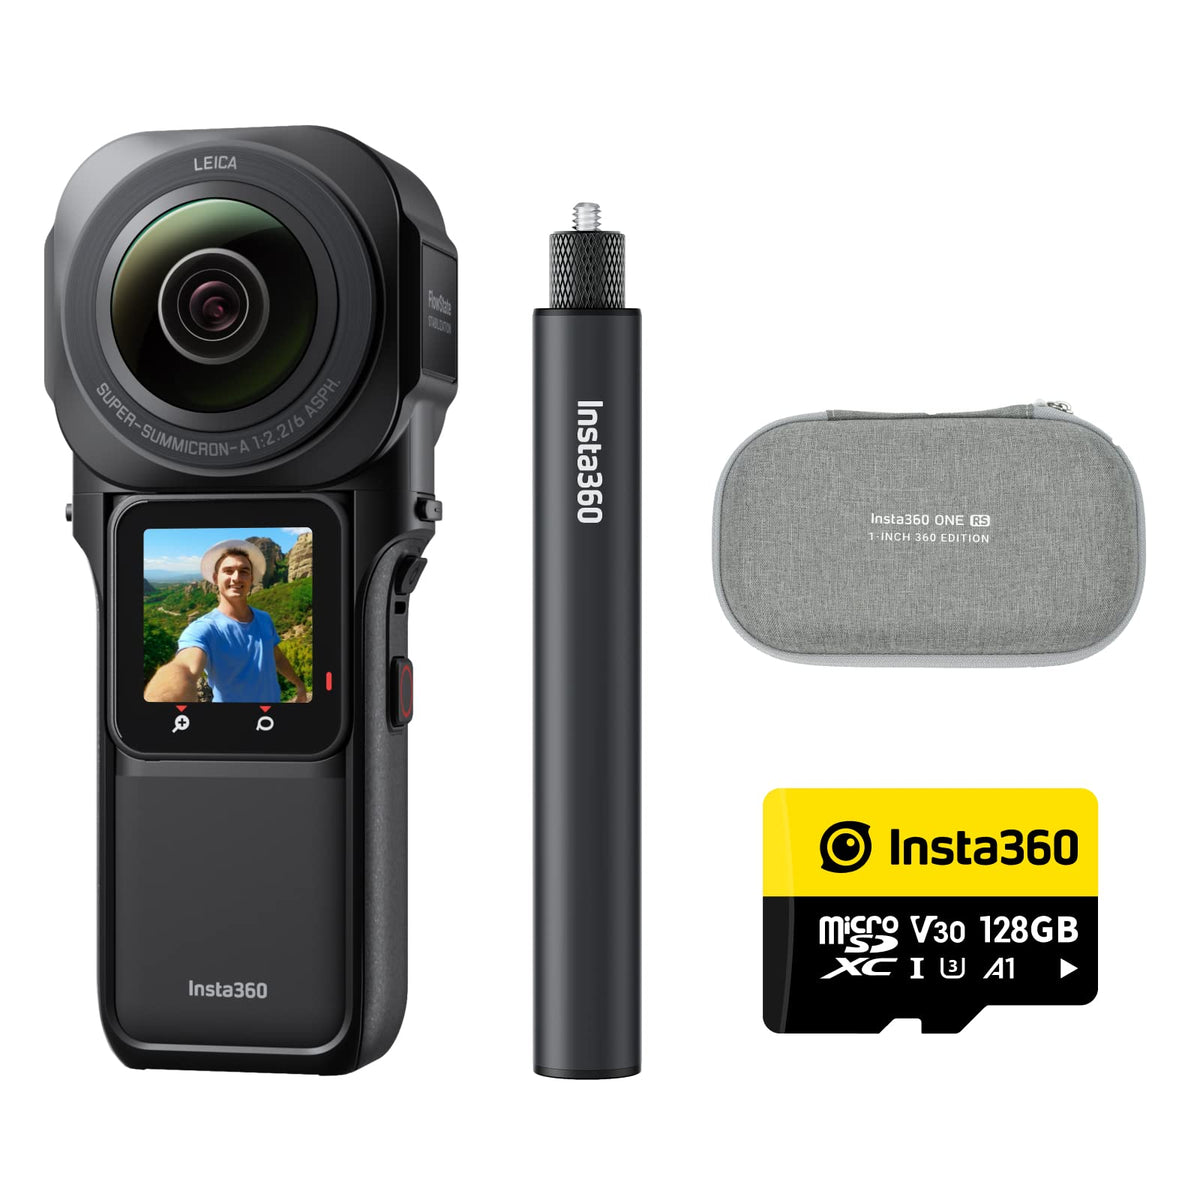 Insta360 ONE RS 1-Inch 360 Edition - 6K 360 Camera with Dual 1-Inch Sensors, Co-Engineered with Leica, 21MP Photo, FlowState Stabilization, Superb Low Light - Get Set Kit